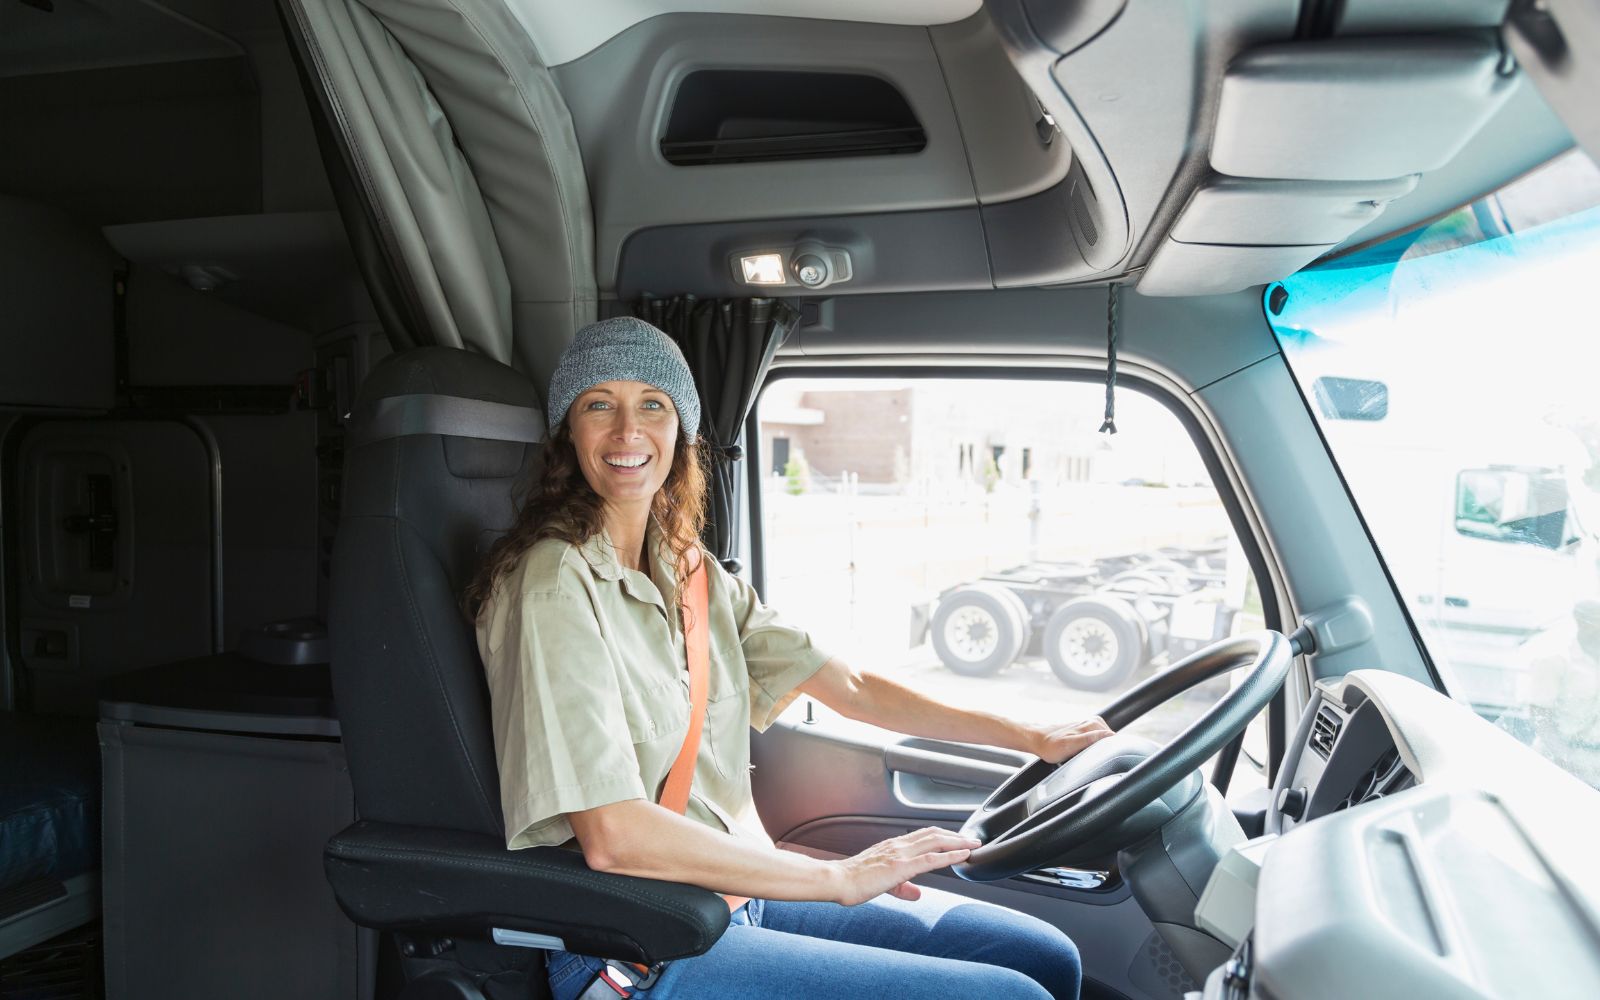 http://www.hydrogenfuelnews.com/wp-content/uploads/2023/03/safety-tips-for-female-truck-drivers.jpg